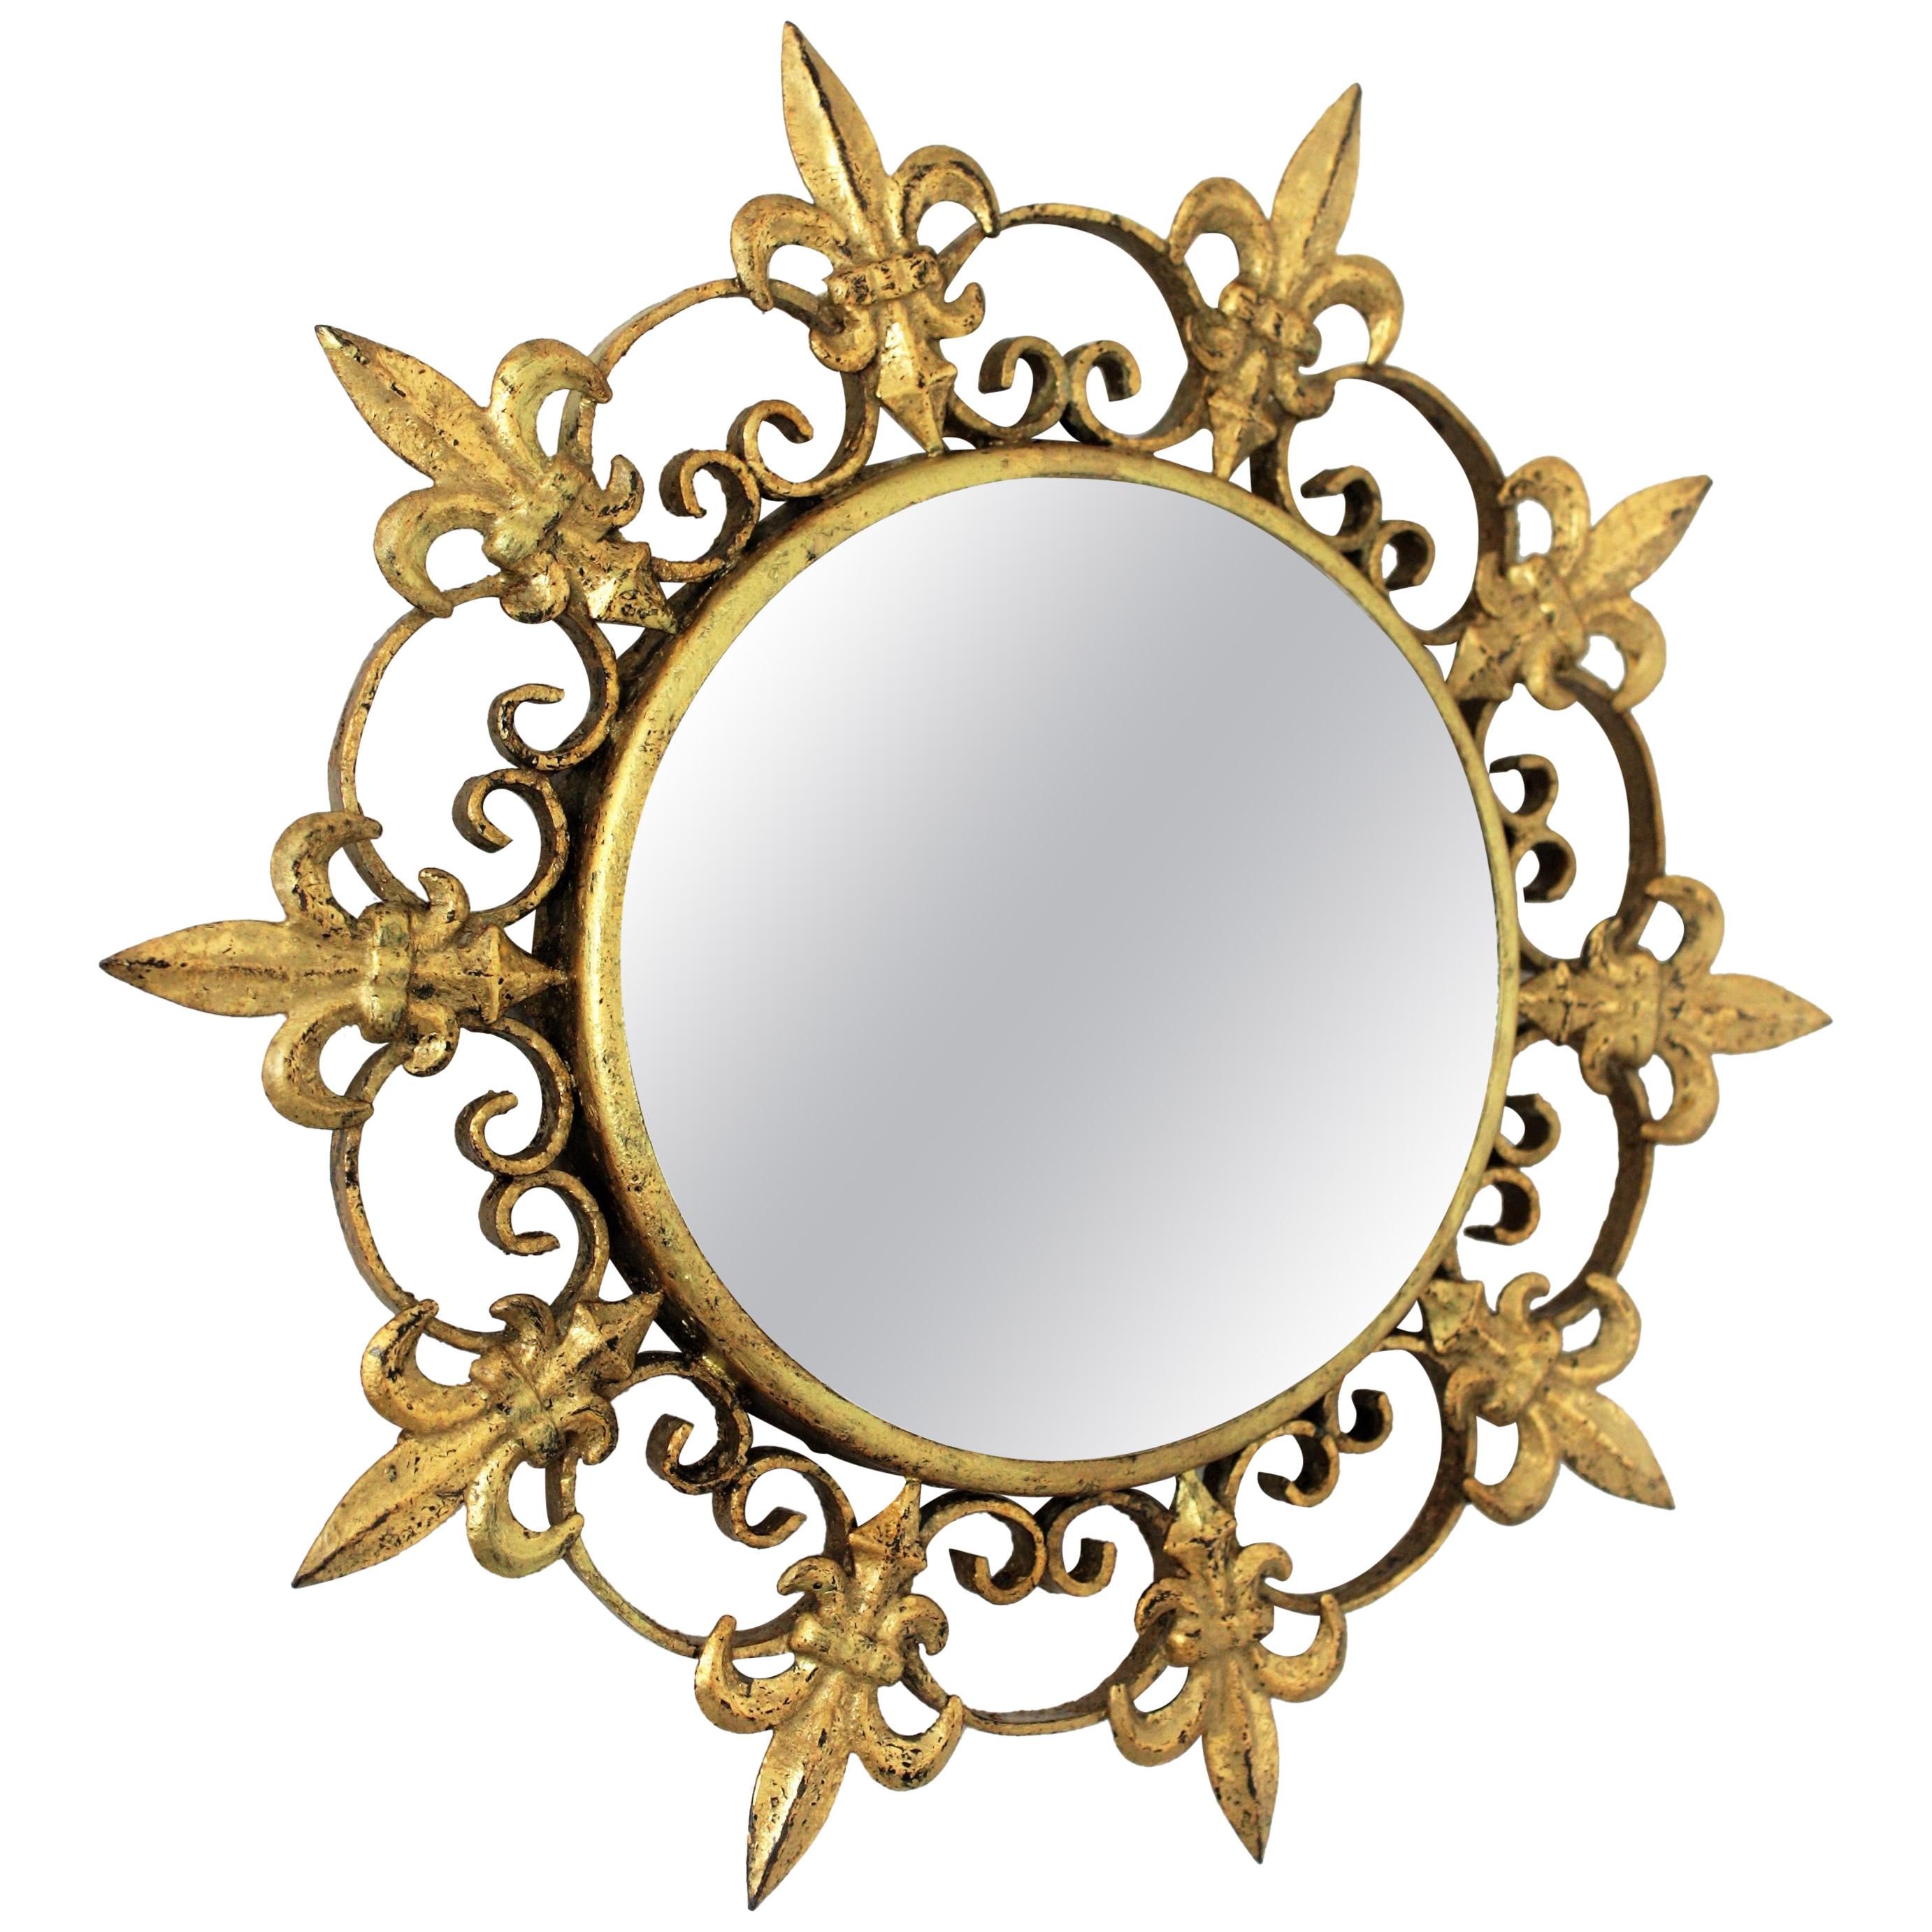 Fleur-de-lis sunburst miniature mMirror in gold leaf gilt iron, Spain, 1940s
A lovely sunburst mirror with fleur-de-lis decorations adorning the frame made in hand-hammered iron. Finished in gold leaf.
Nice design combining Neoclassical and